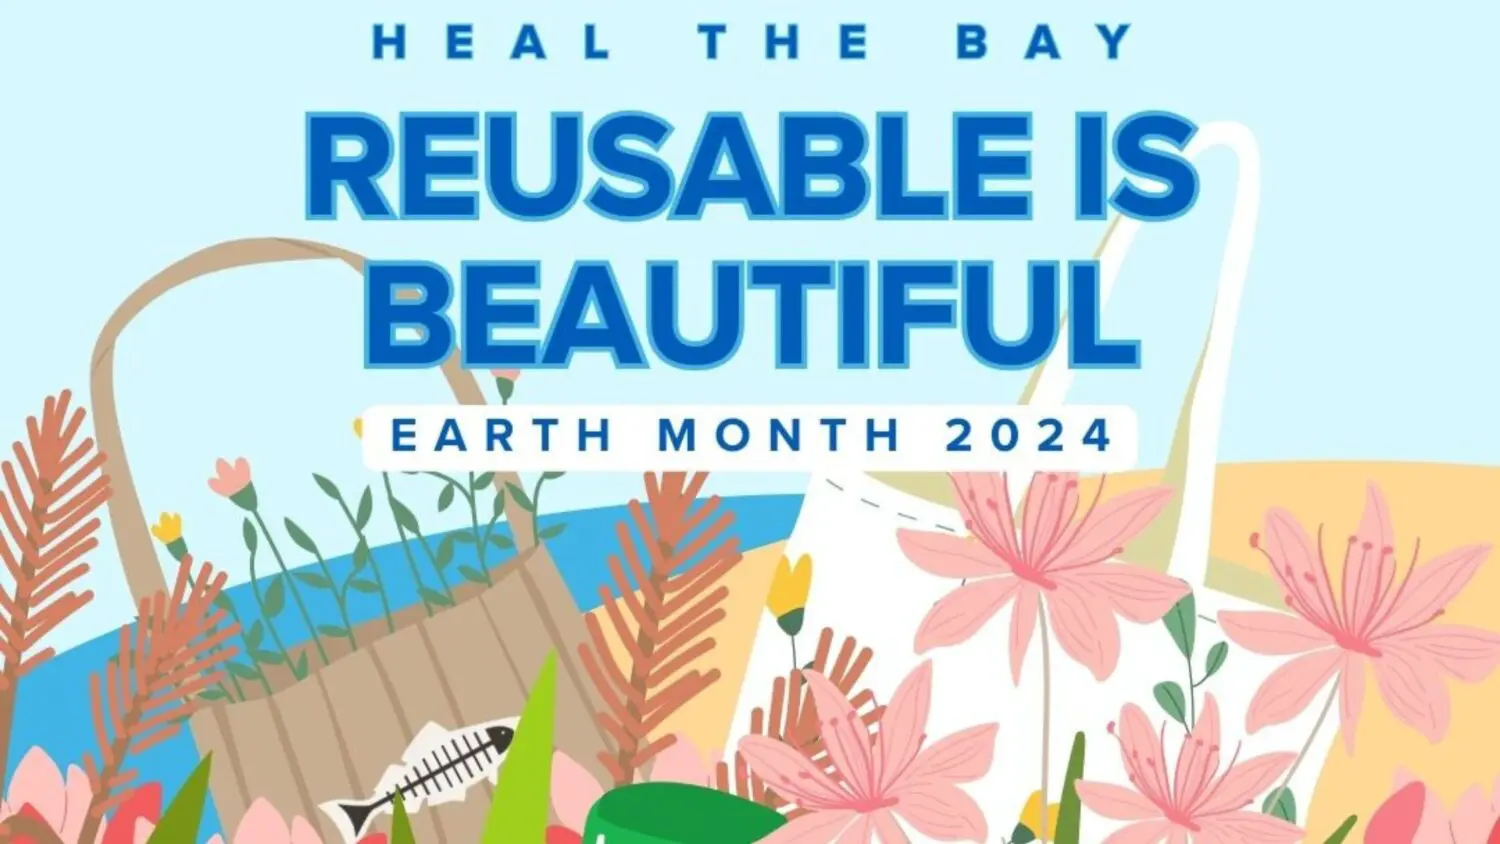 Celebrating Earth Month 2024: Reusable Is Beautiful - Heal the Bay